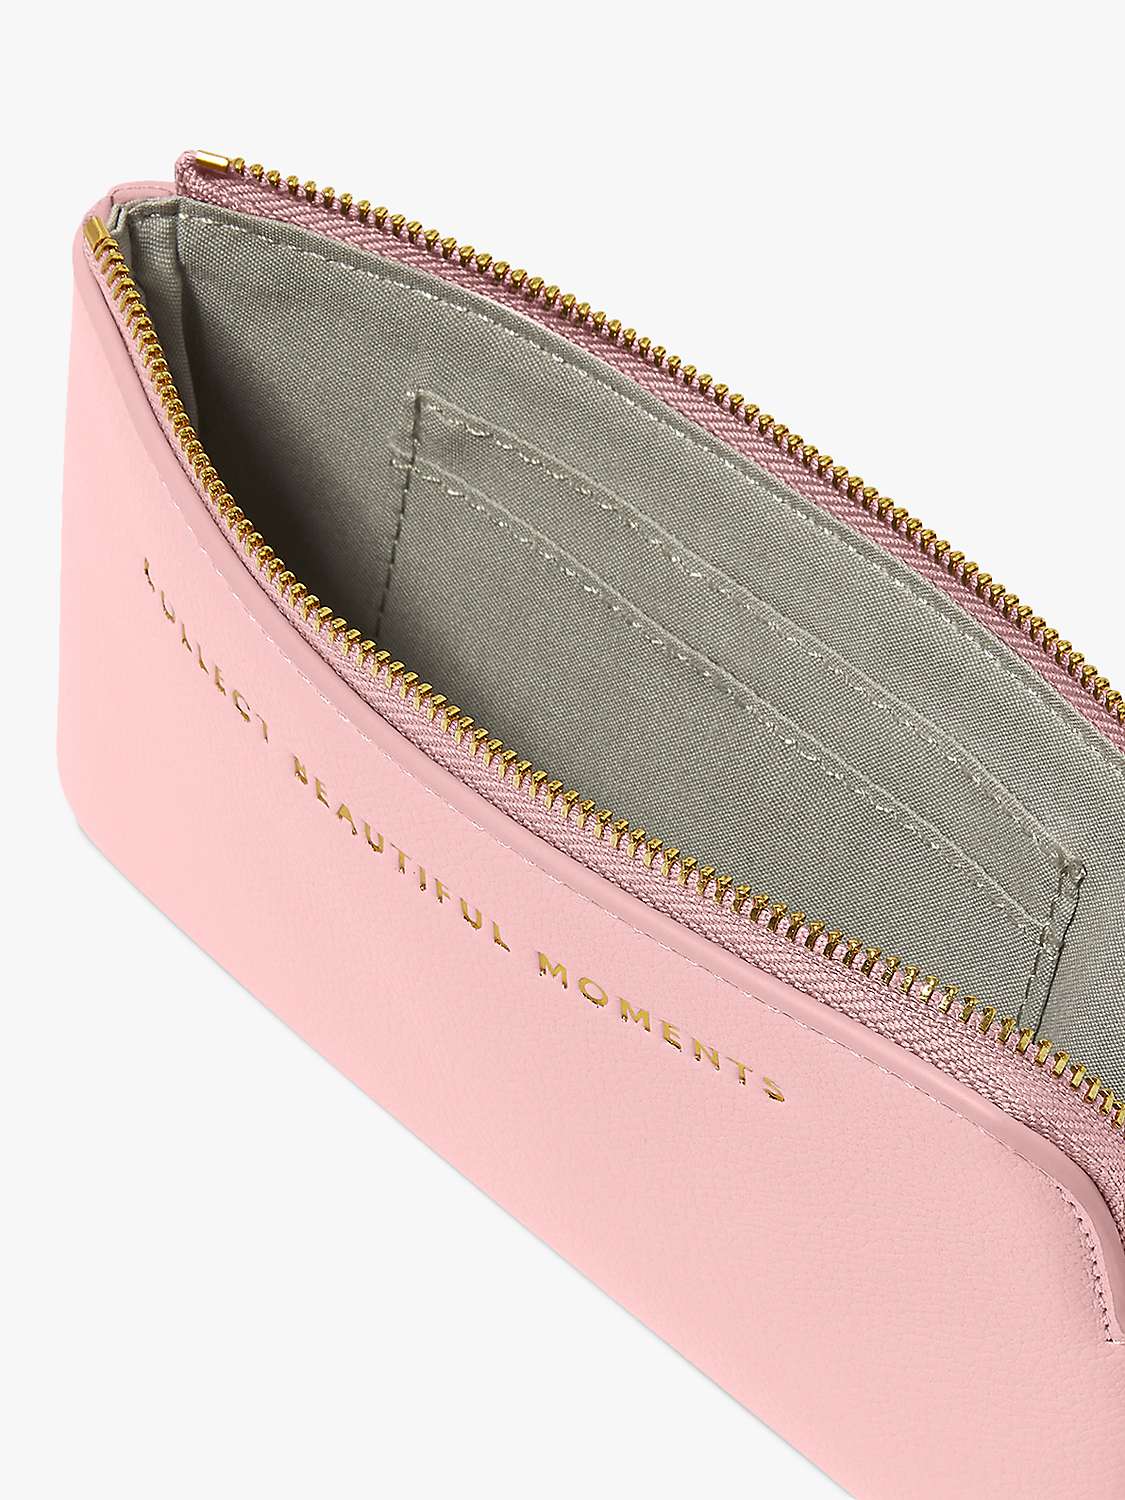 Buy Katie Loxton Collect Beautiful Moments Wrist Pouch, Cloud Pink Online at johnlewis.com